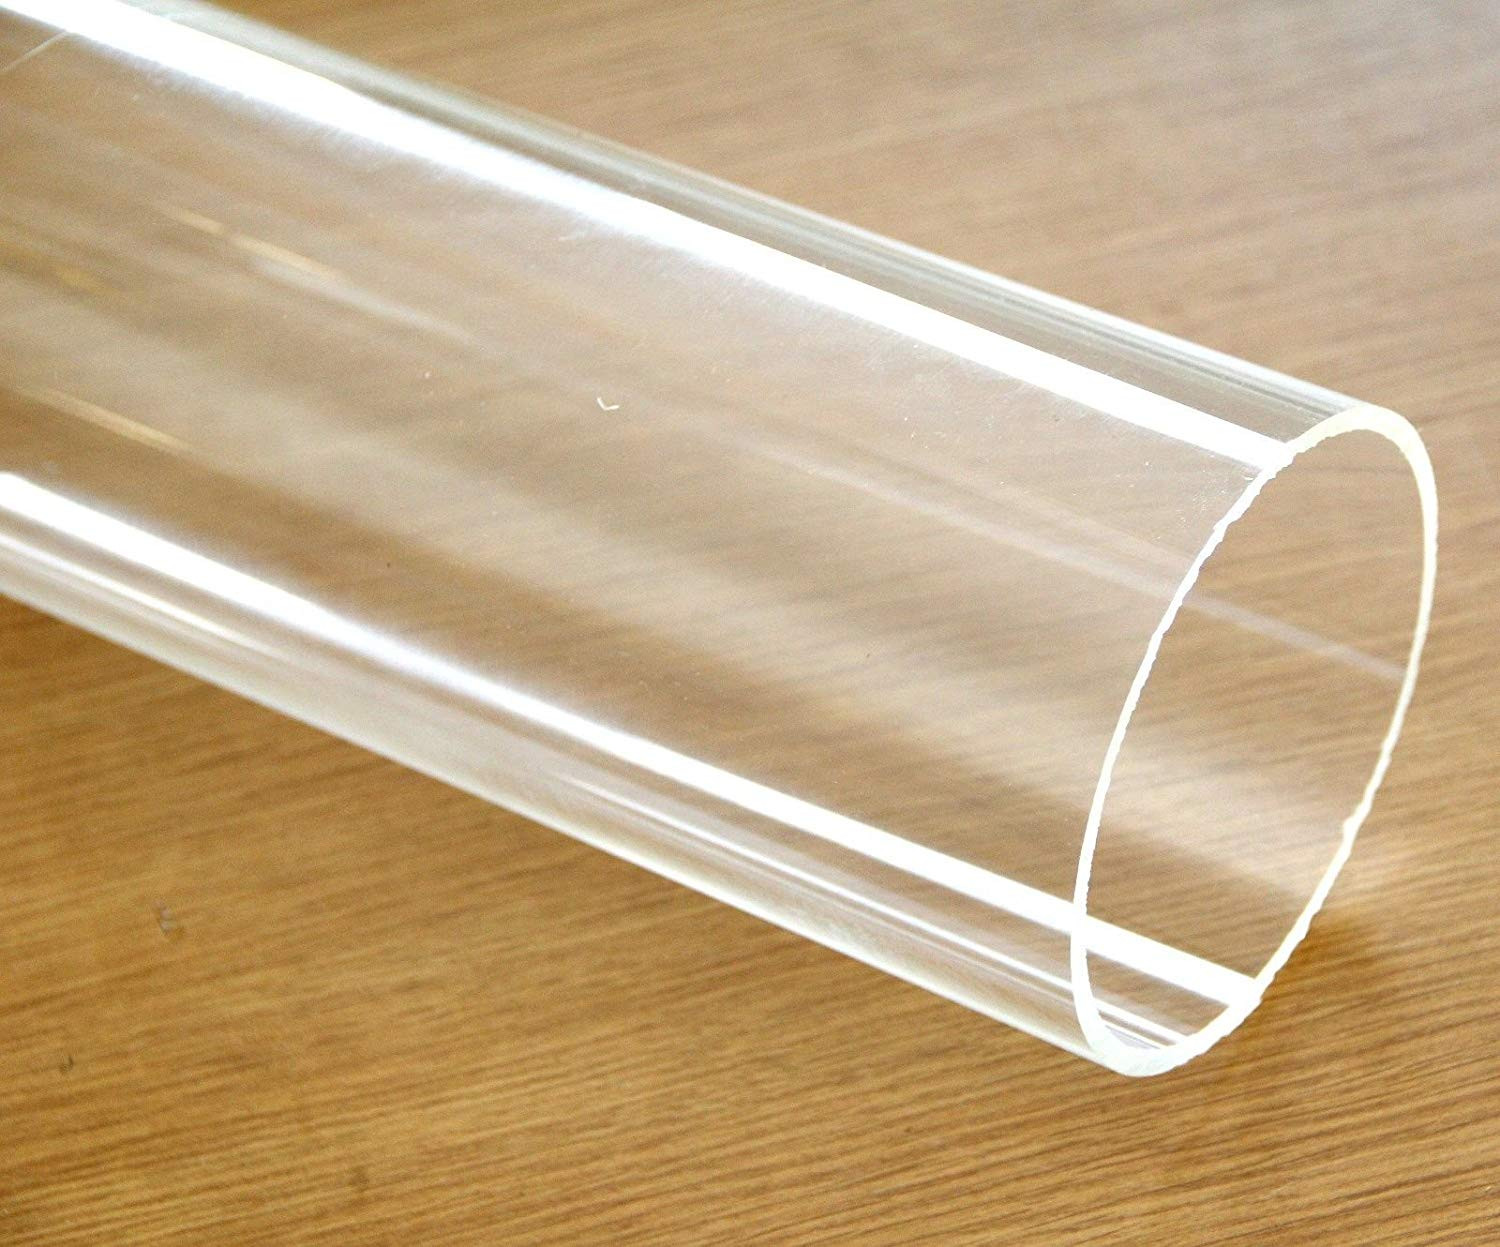 27 Popular 2 Feet Tall Glass Vase 2024 free download 2 feet tall glass vase of amazon com clear acrylic plastic plexiglass pipe tube 4 114 mm 3 pertaining to amazon com clear acrylic plastic plexiglass pipe tube 4 114 mm 3 ft long stick 4 5 od